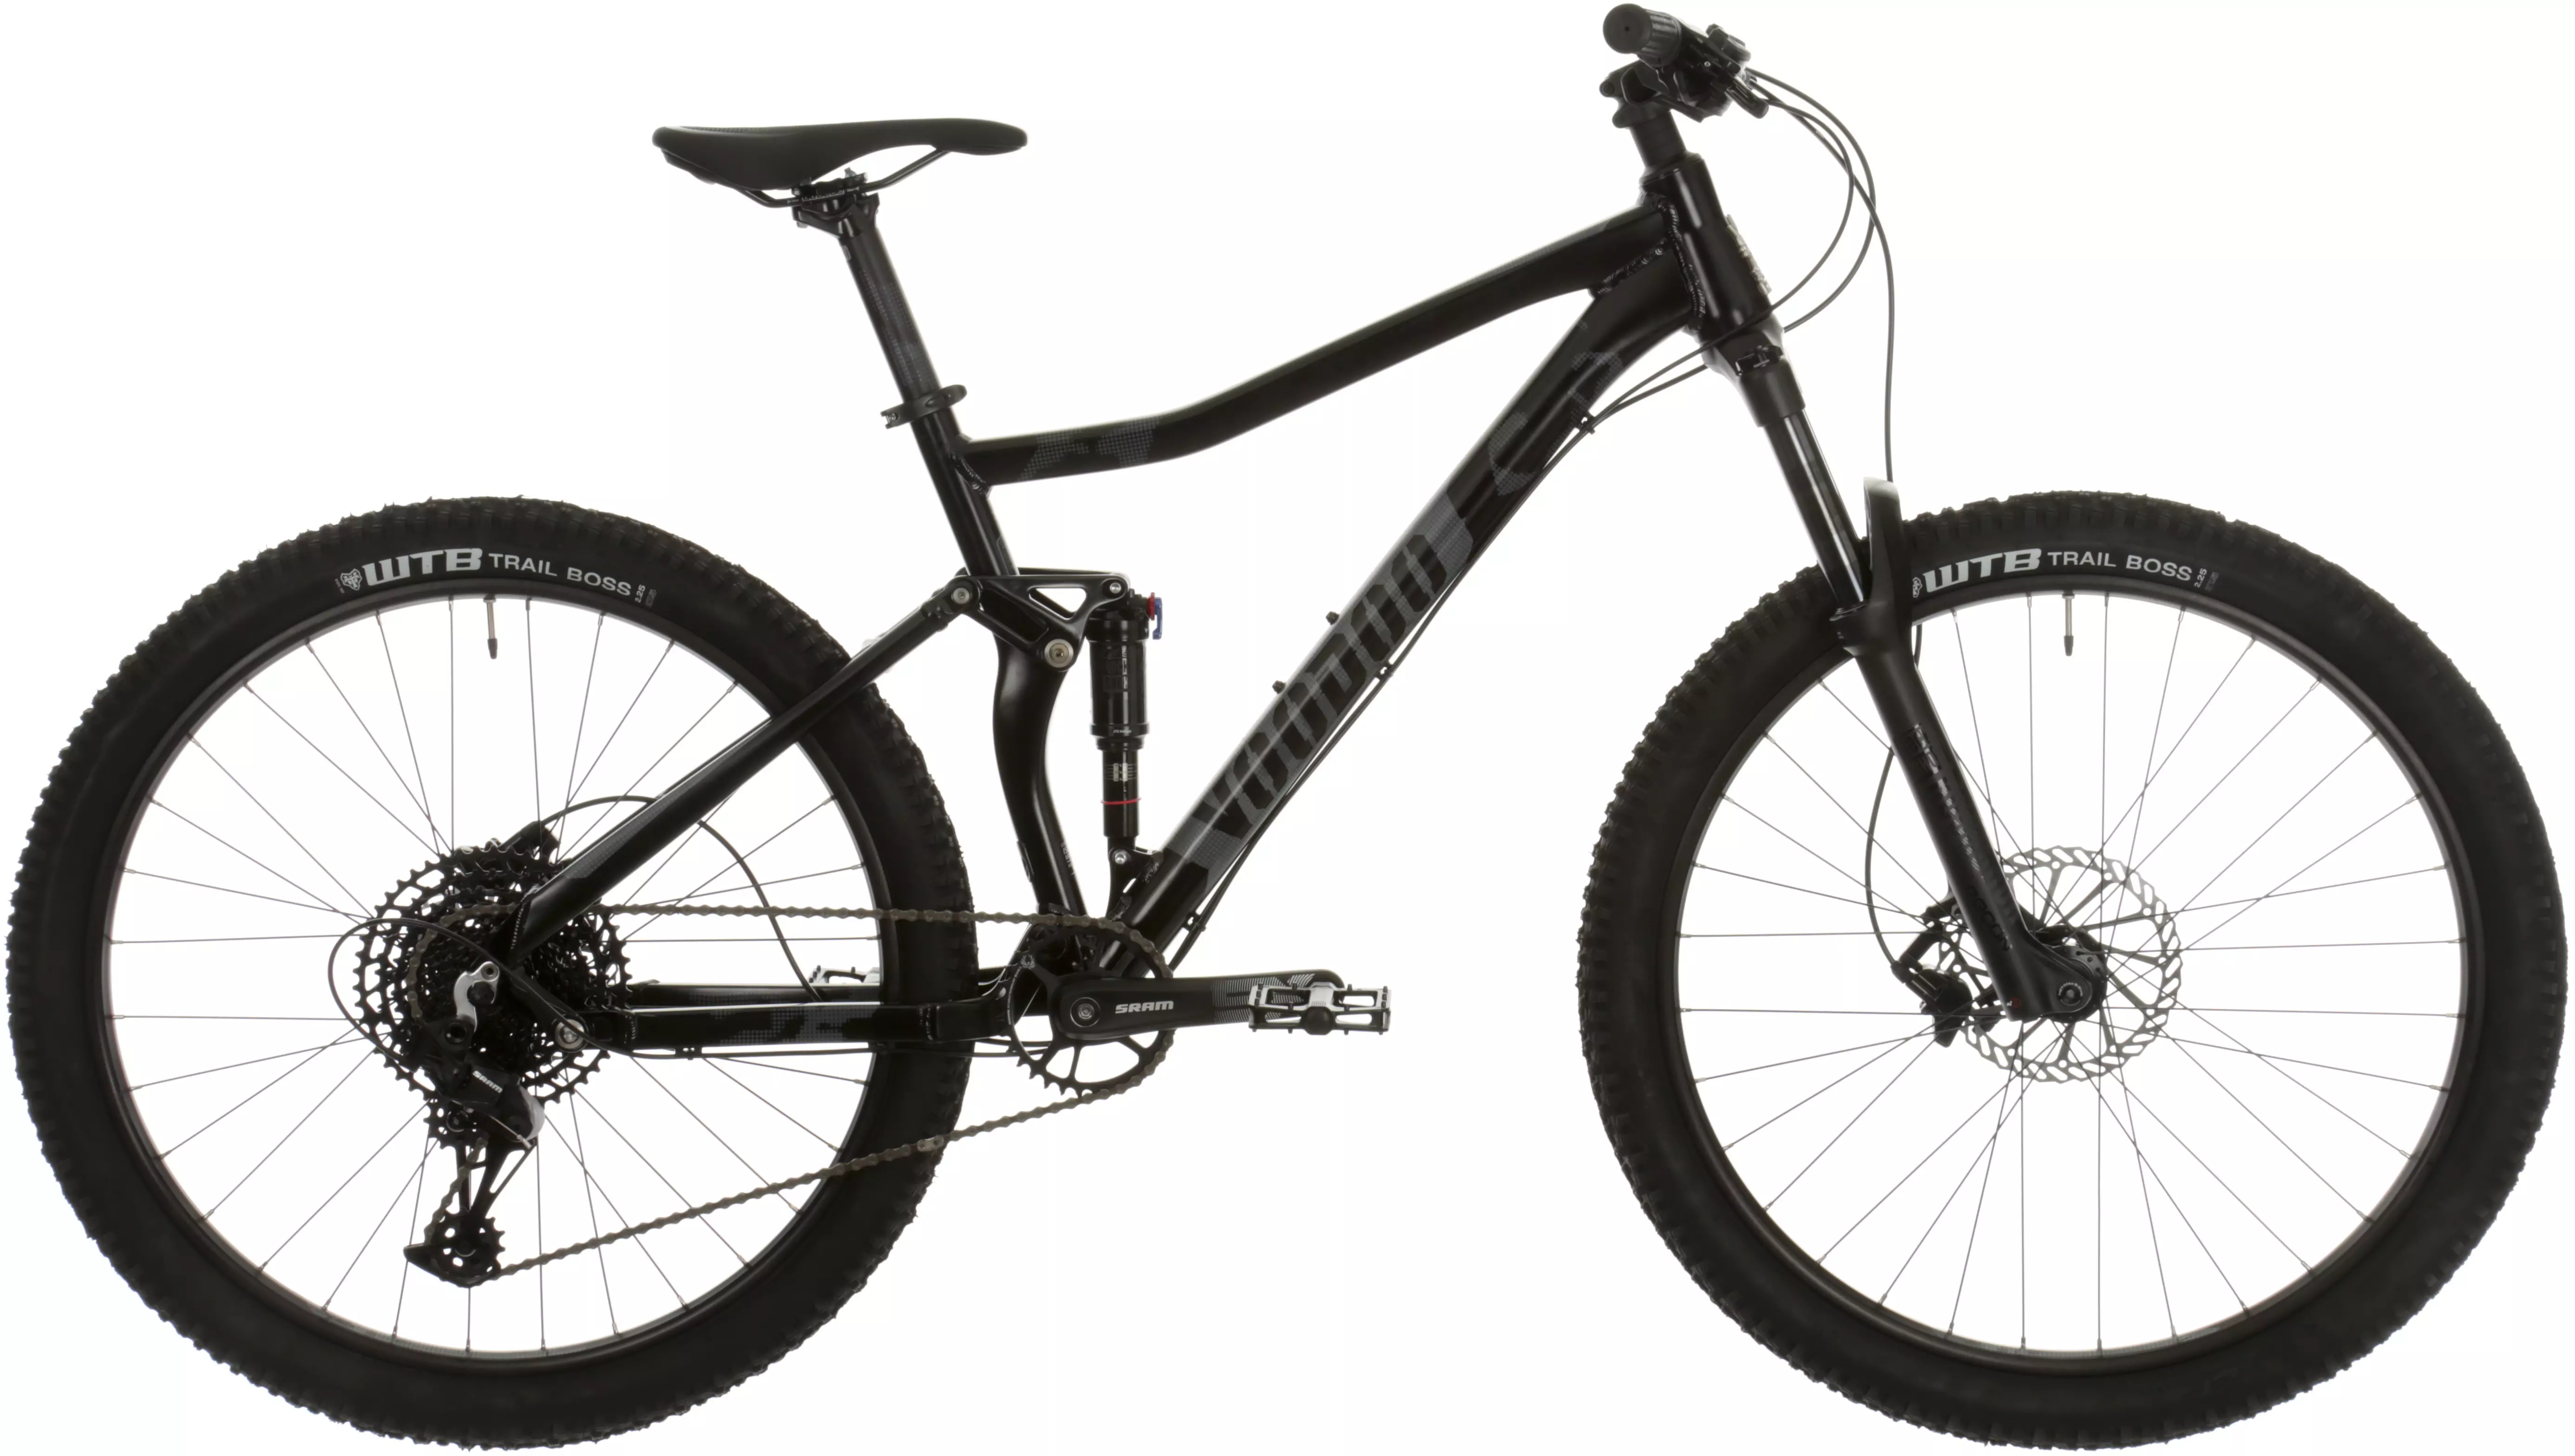 voodoo canzo full suspension mens mountain bike